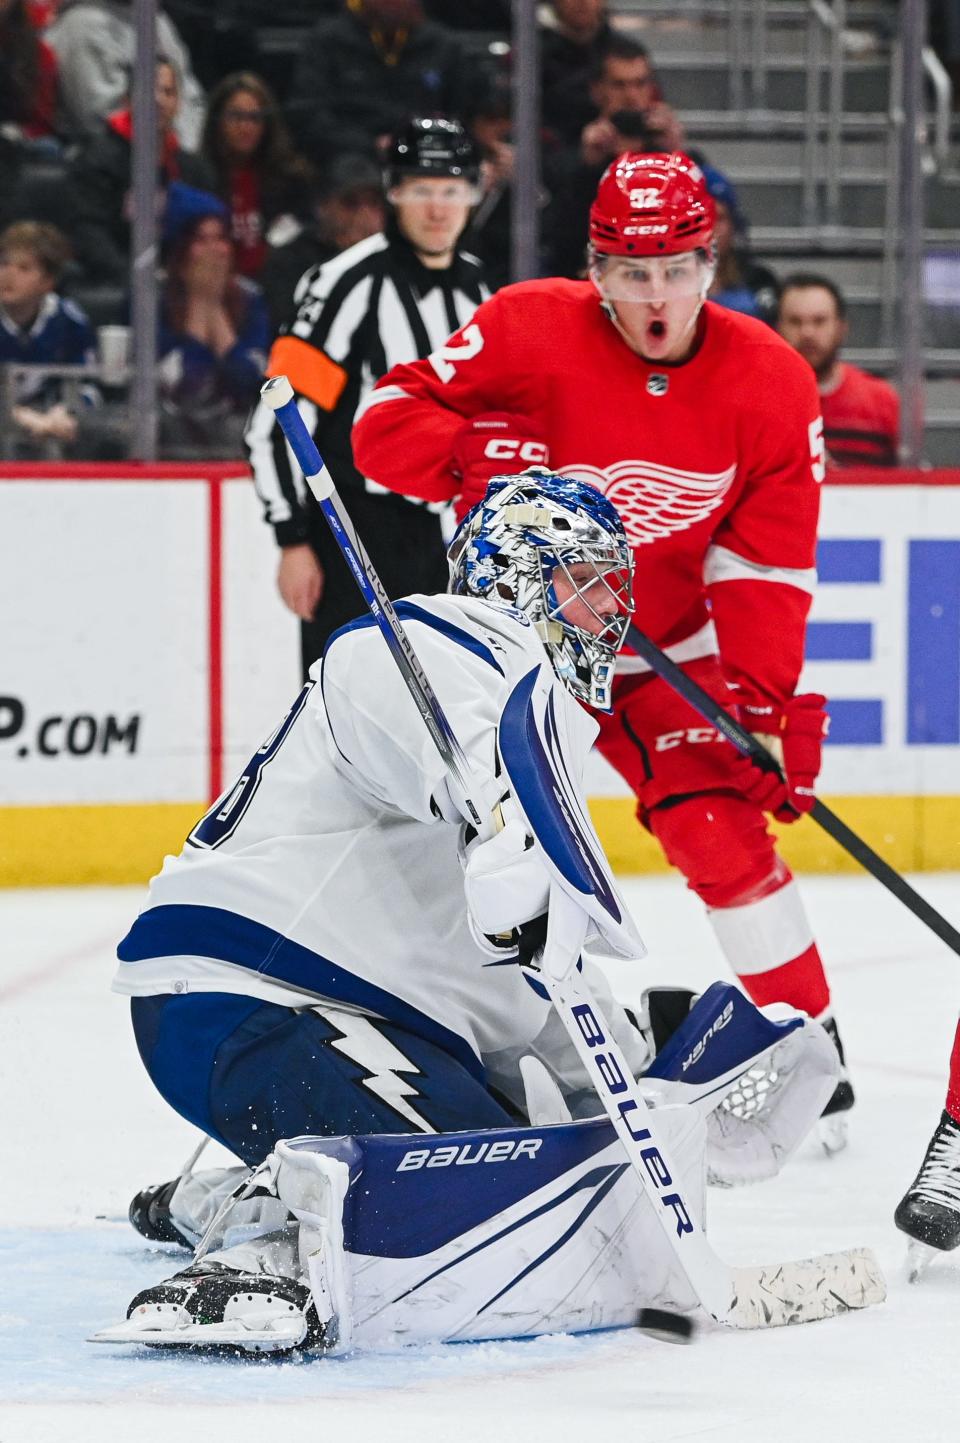 Tampa Bay Lightning goaltender Andrei Vasilevskiy (88) makes a save during the second period against the Detroit Red Wings at Little Caesars Arena in Detroit on Saturday, Feb. 25, 2023.